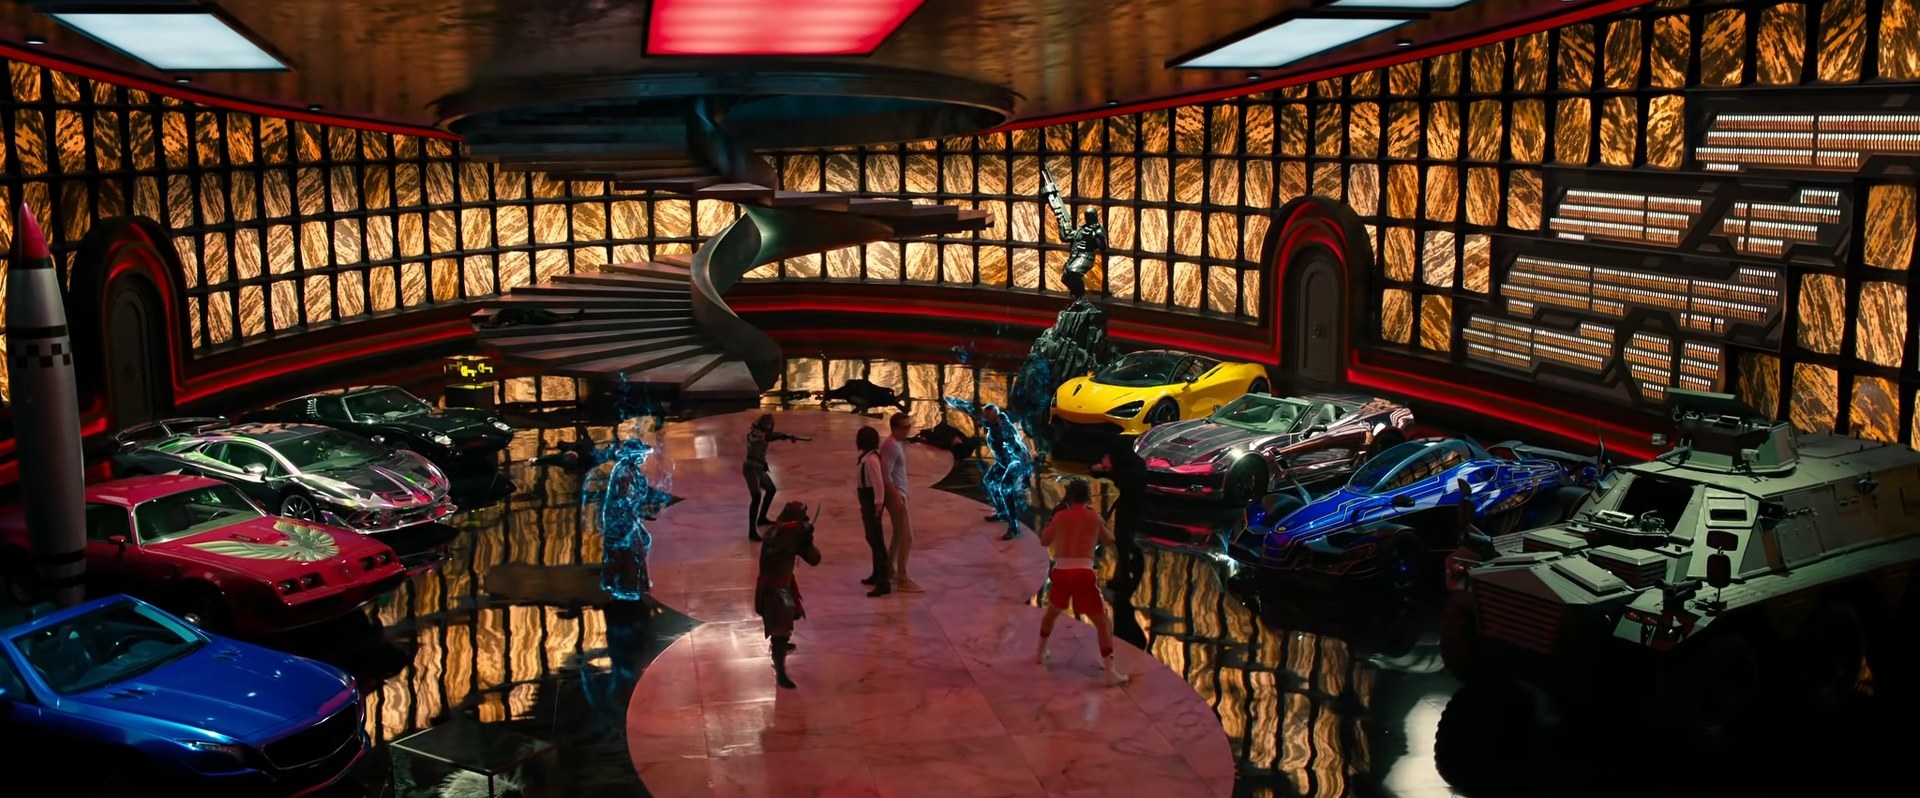 A hall of full of expensive cars and some people fighting with each other